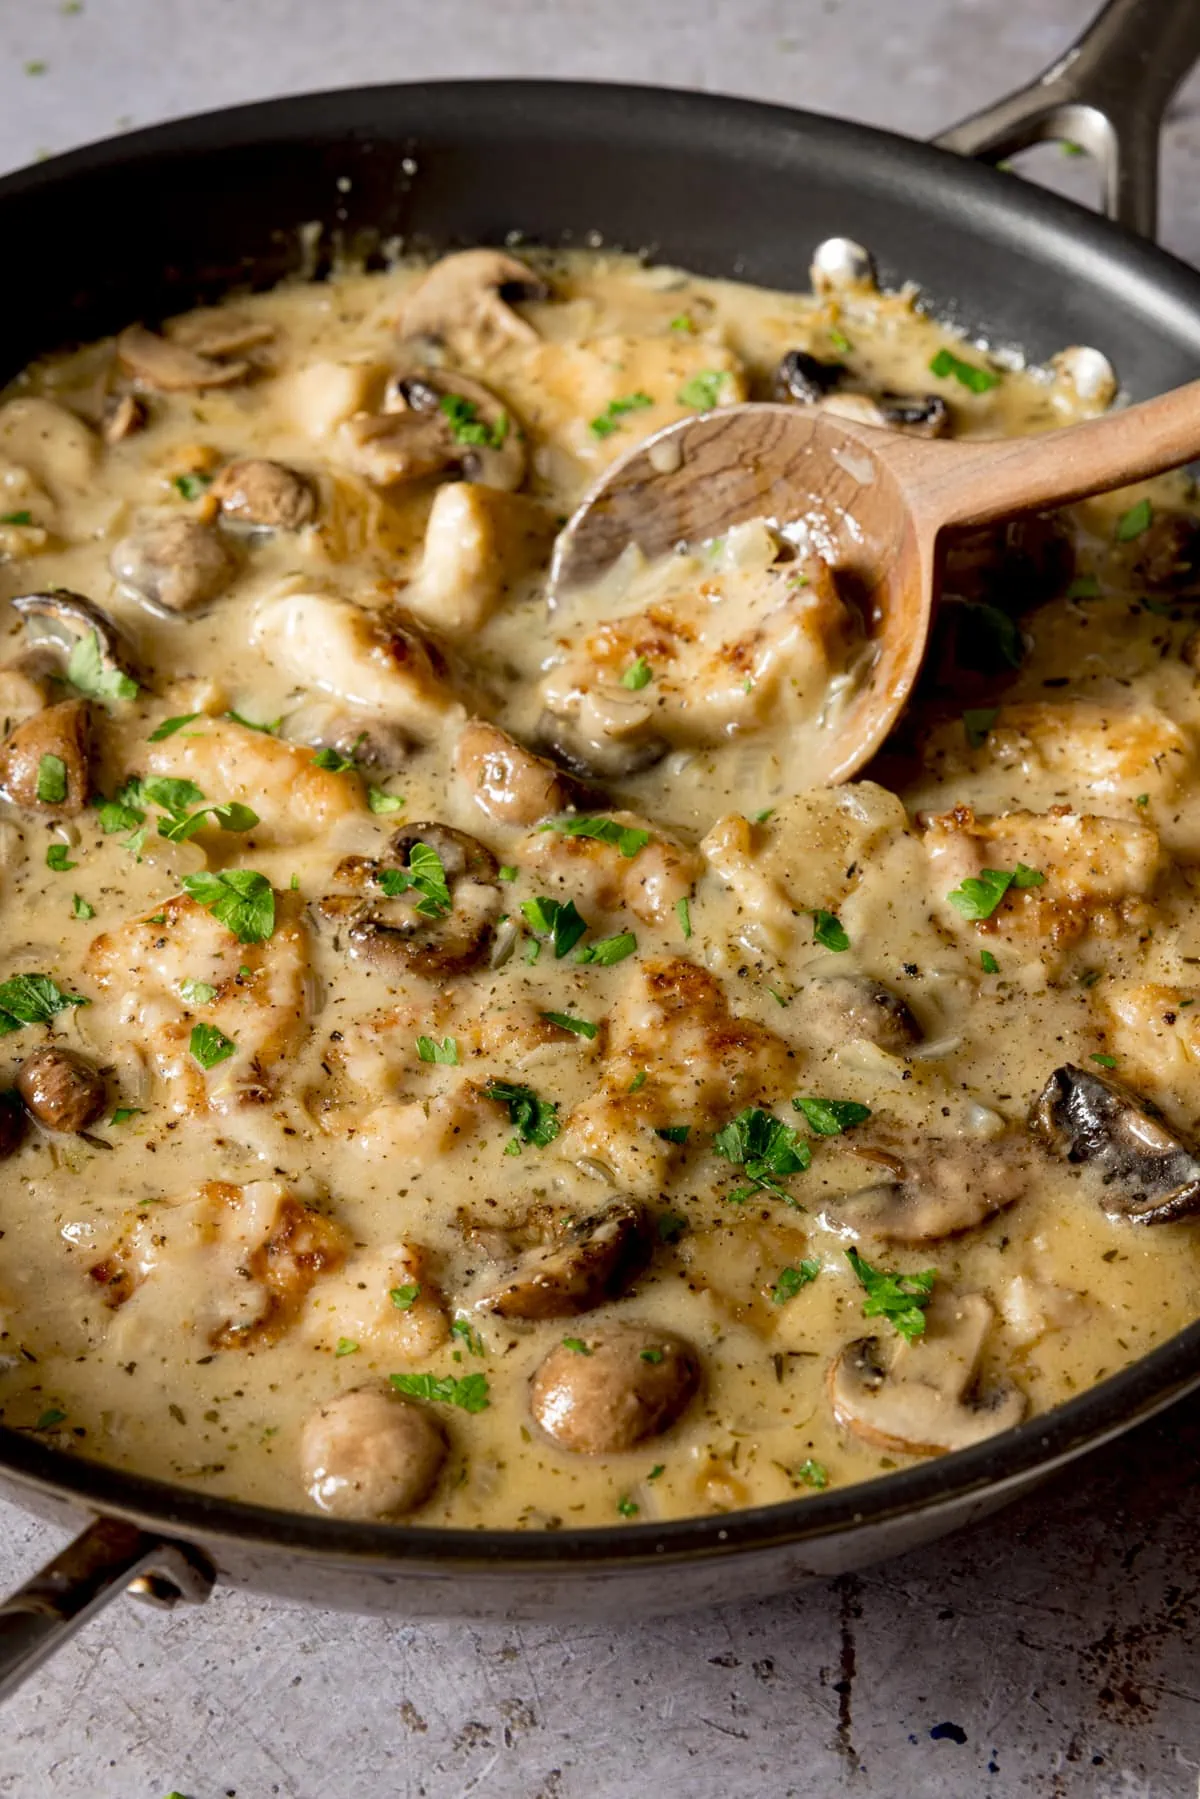 Close up of a large pan filled with creamy chicken and mushroom casserole. There is a wooden spoon in the pan.